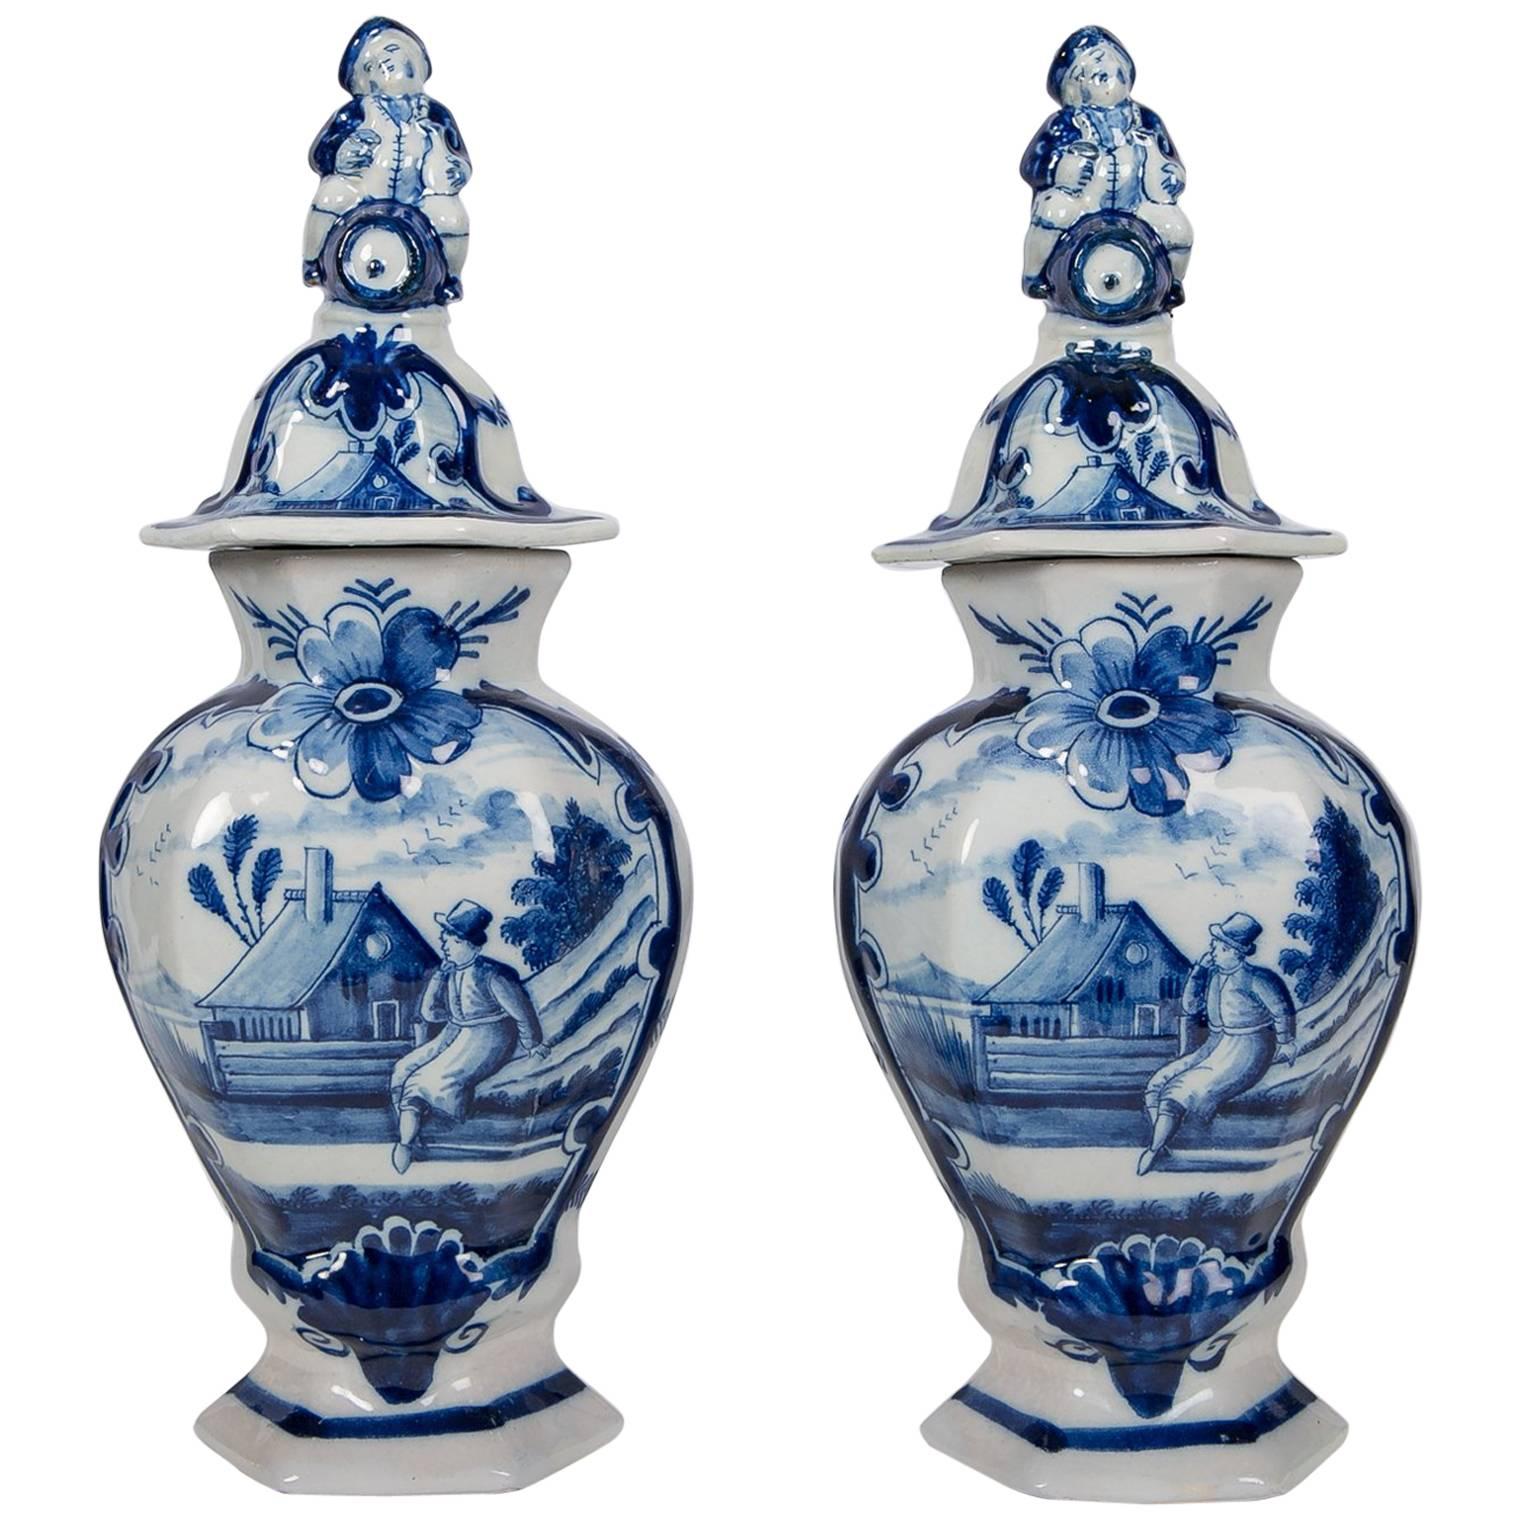 Pair of Blue and White Delft Mantle Vases Made by De Klaauw circa 1780